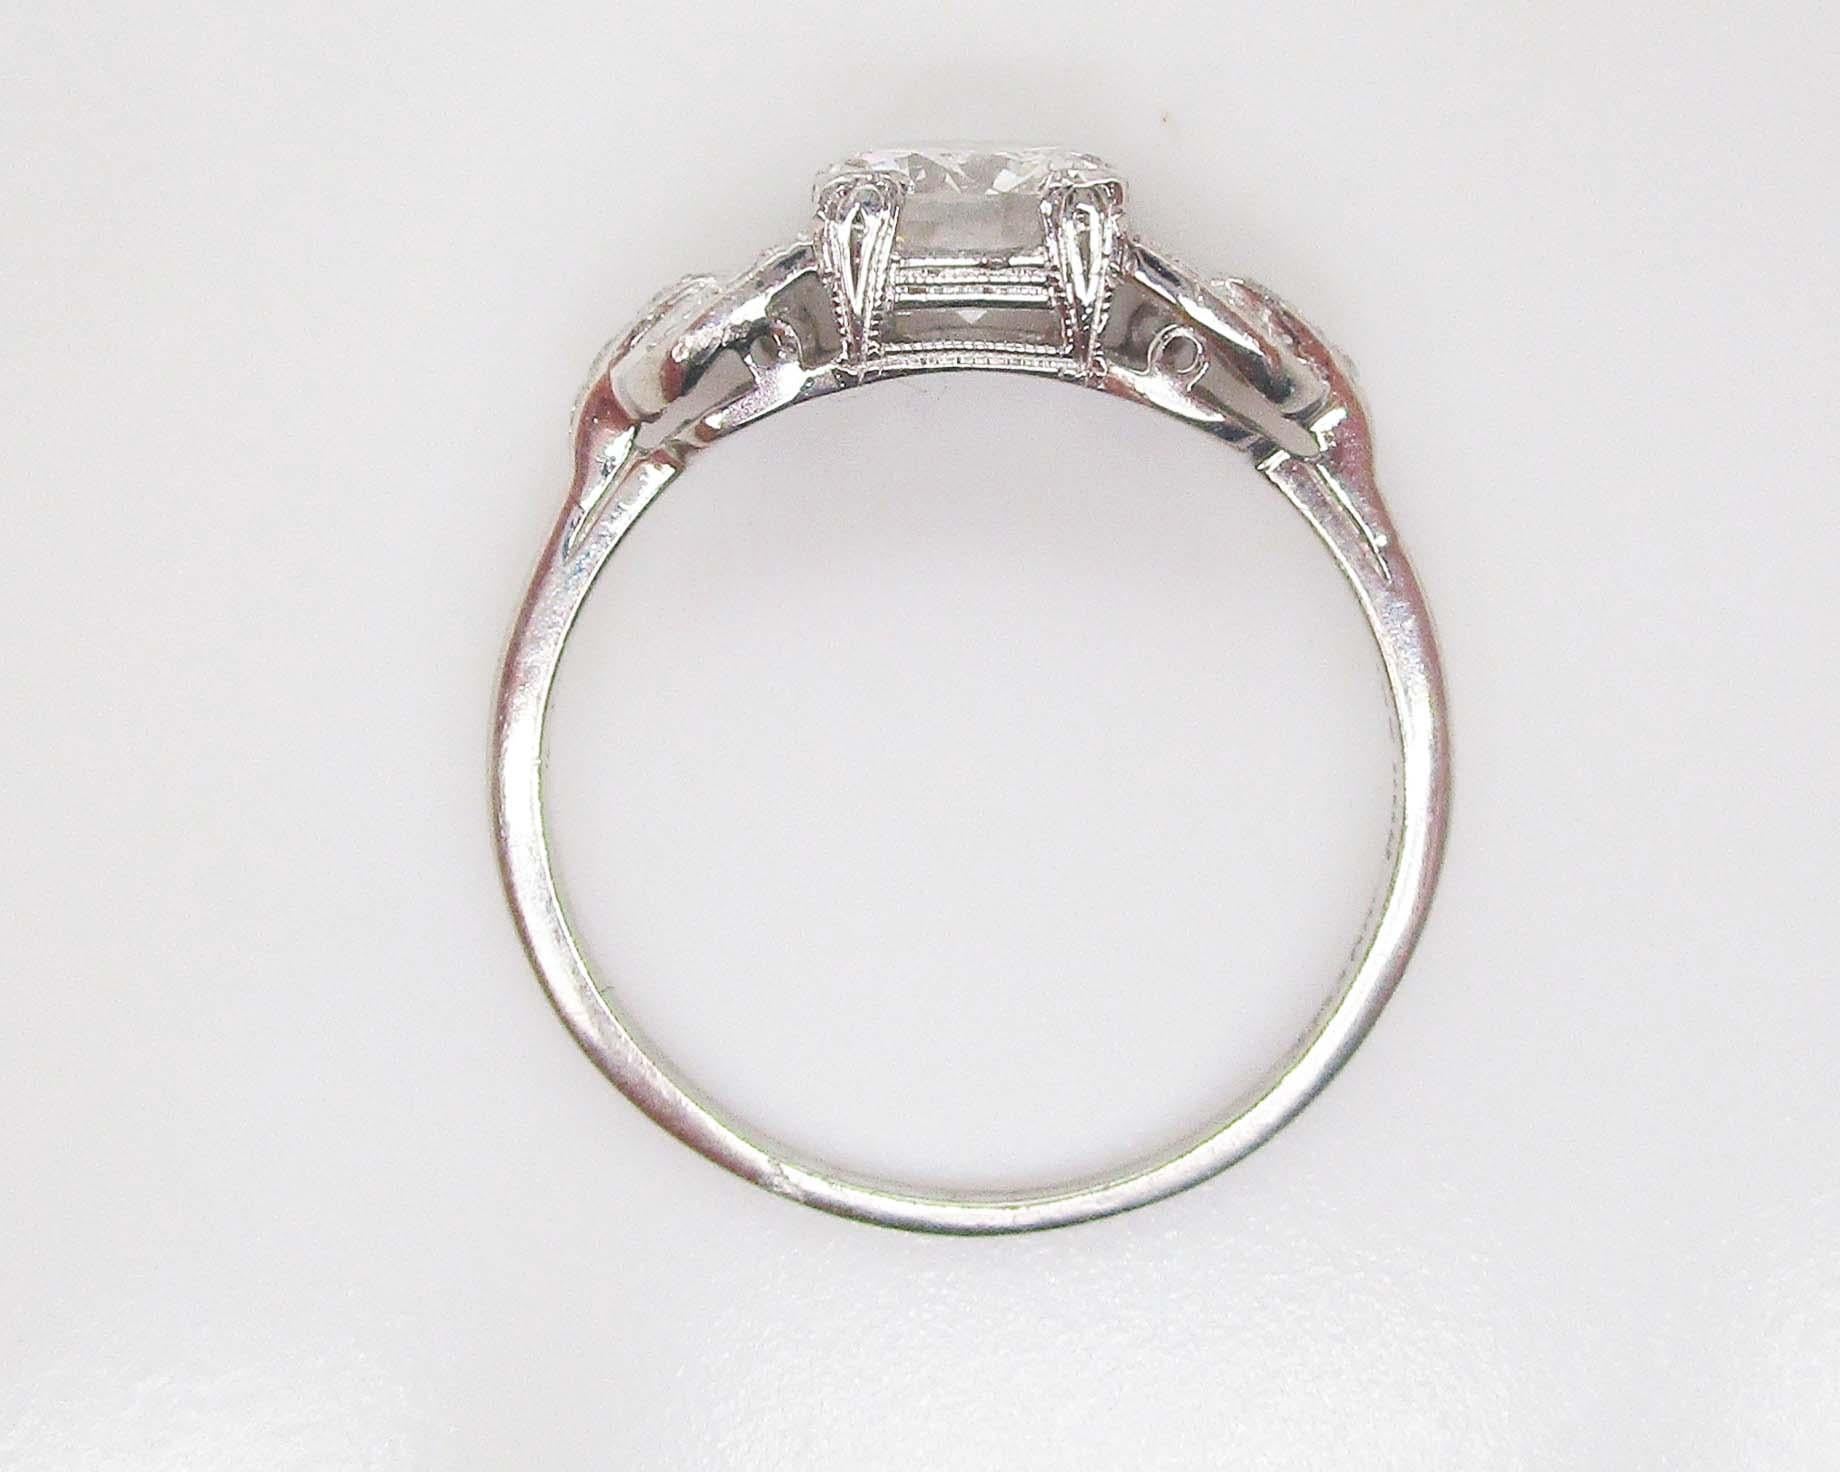 1920's Deco European Cut Diamond Engagement Ring with GIA Report For Sale 1